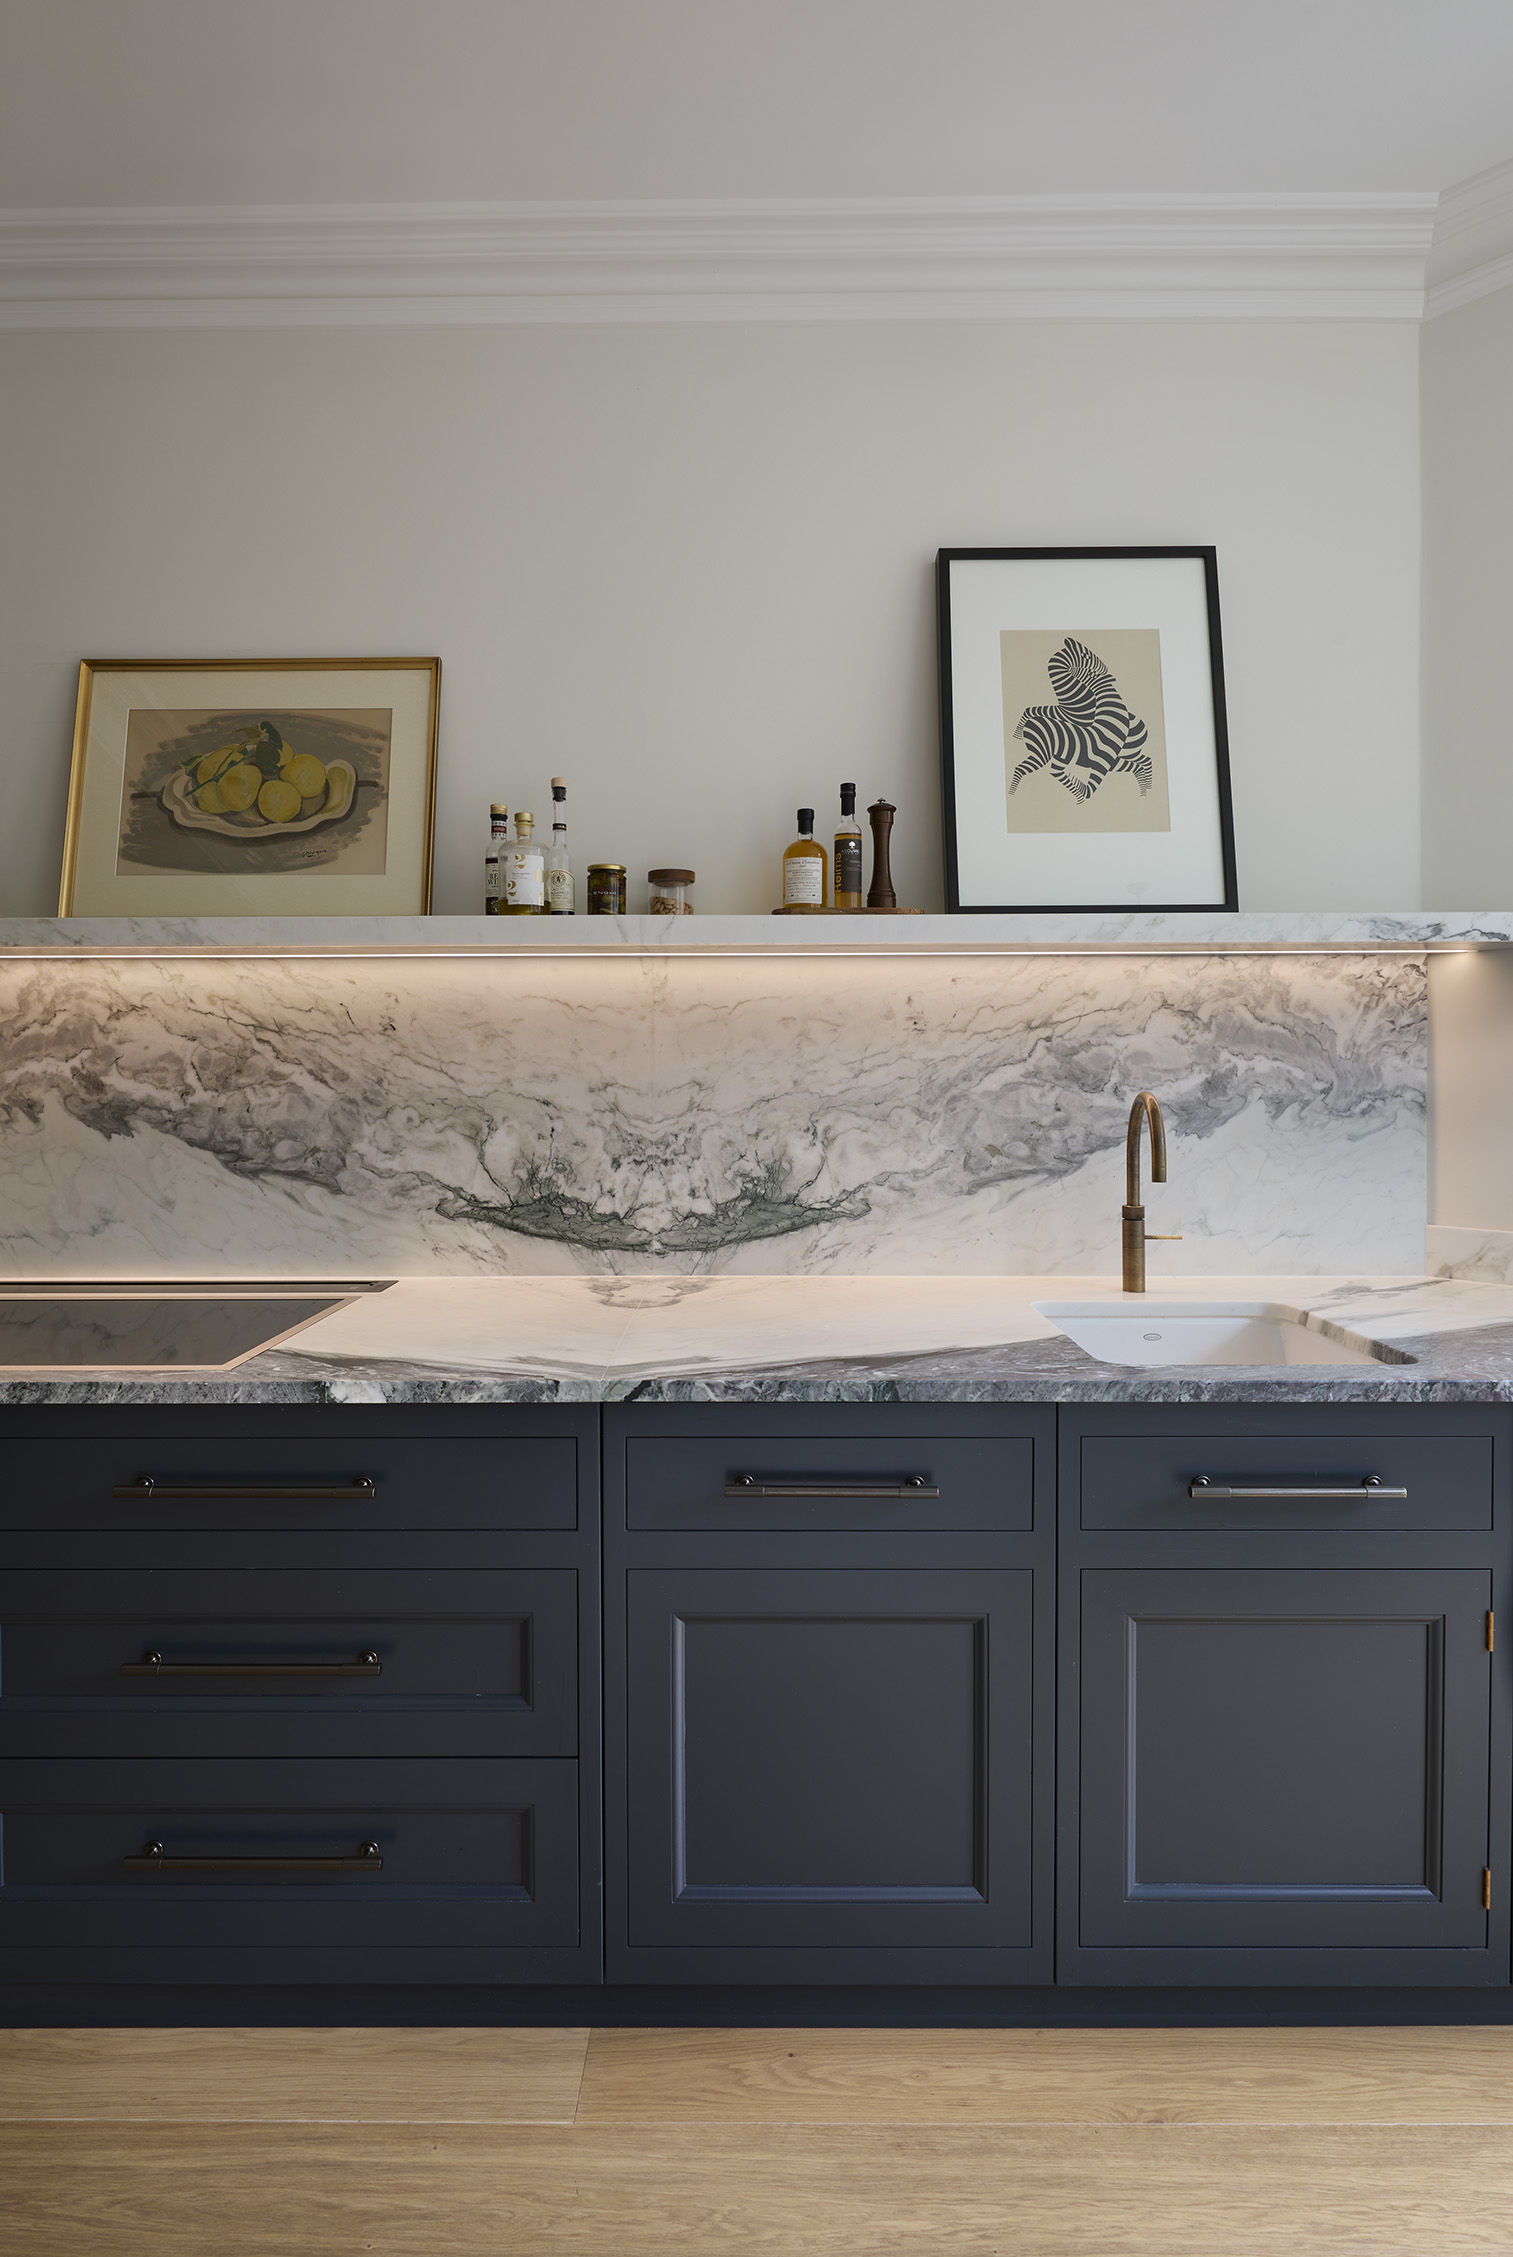 A detail view of a veined marble backsplash with shelf above dark grey base cabinets